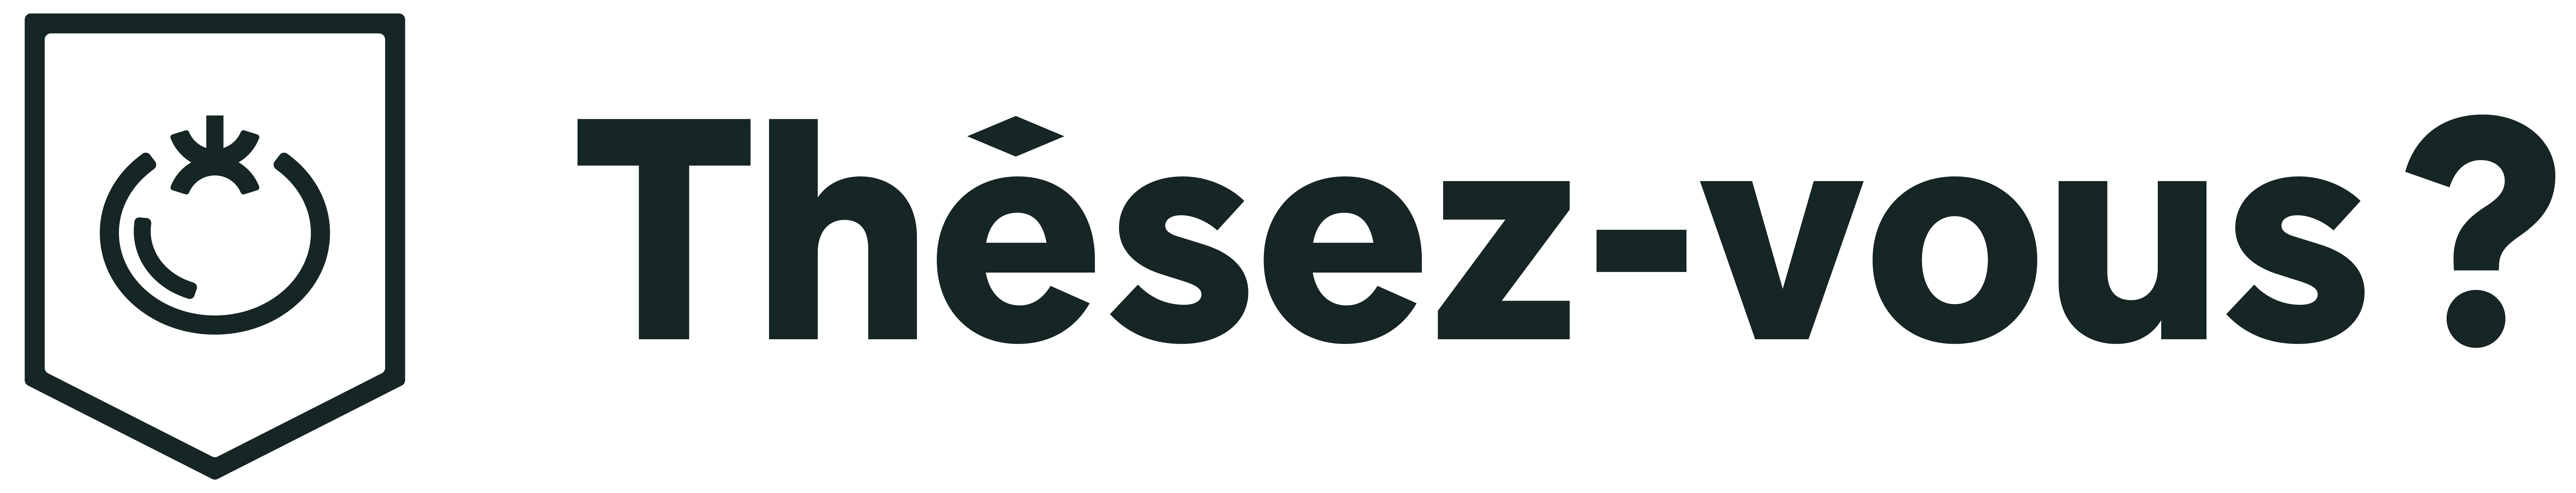 THESEZ VOUS logo general 18oct2018